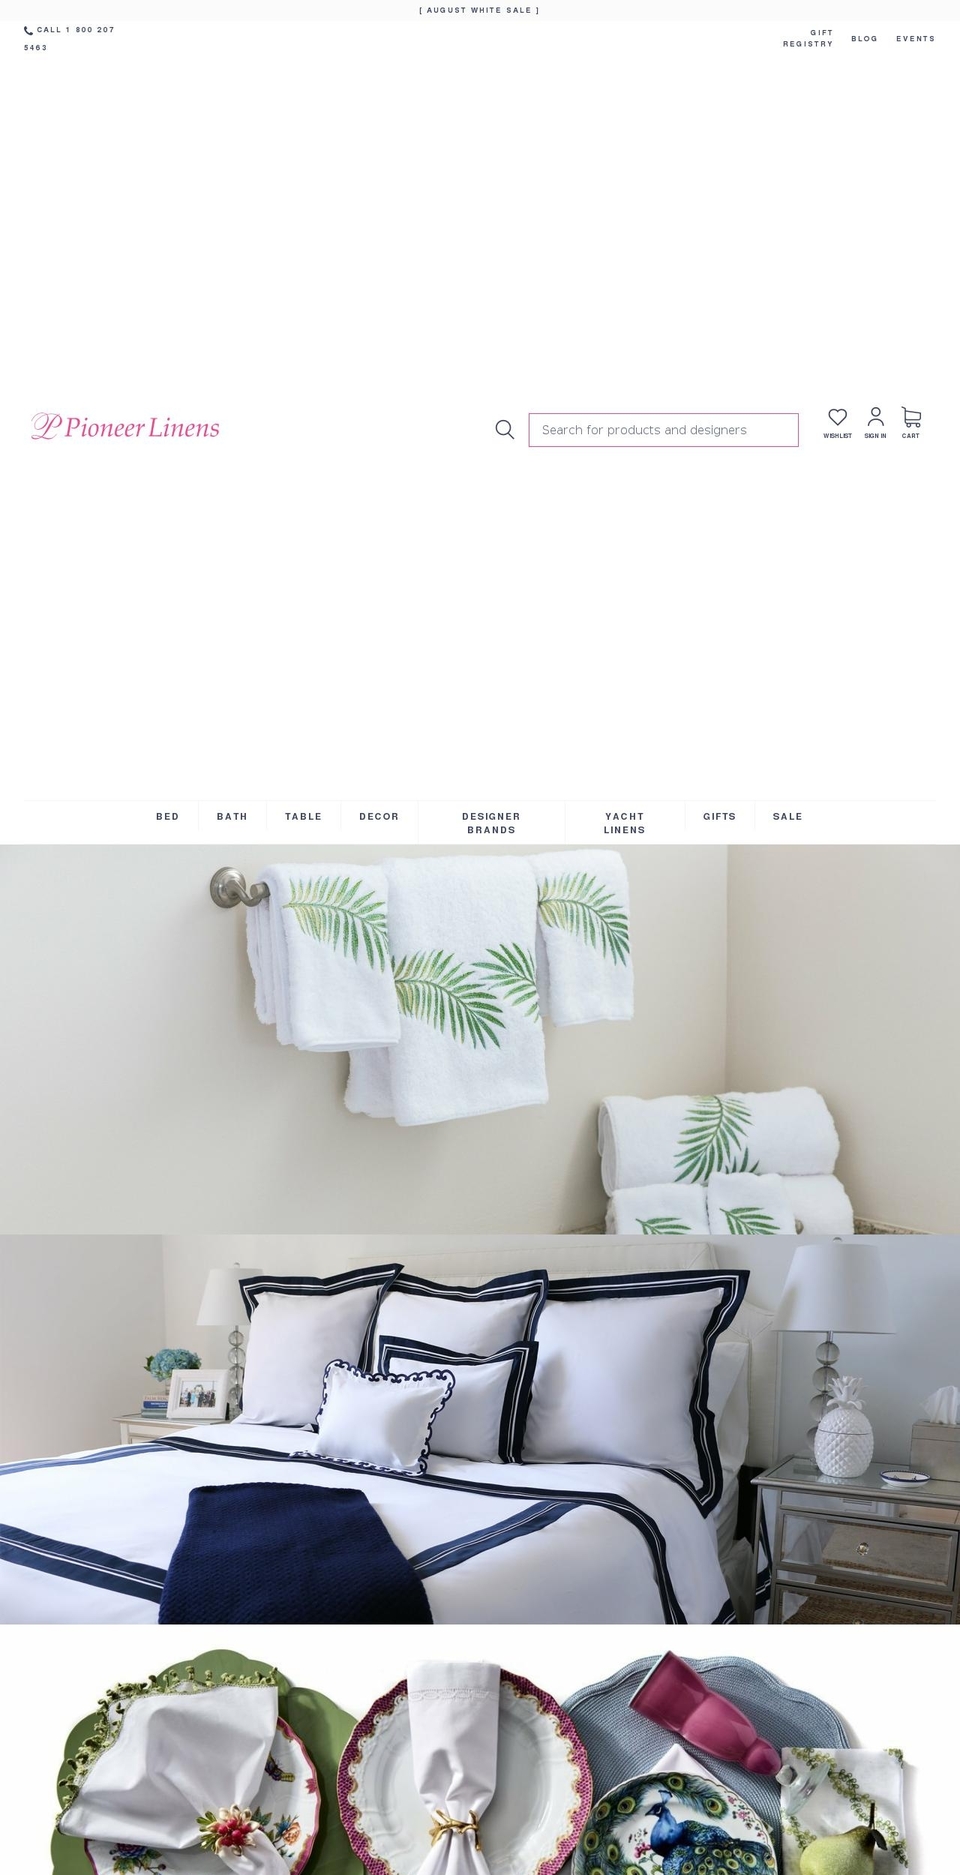 Buko Shopify Theme - Products Consolidation Shopify theme site example pioneerlinen.us